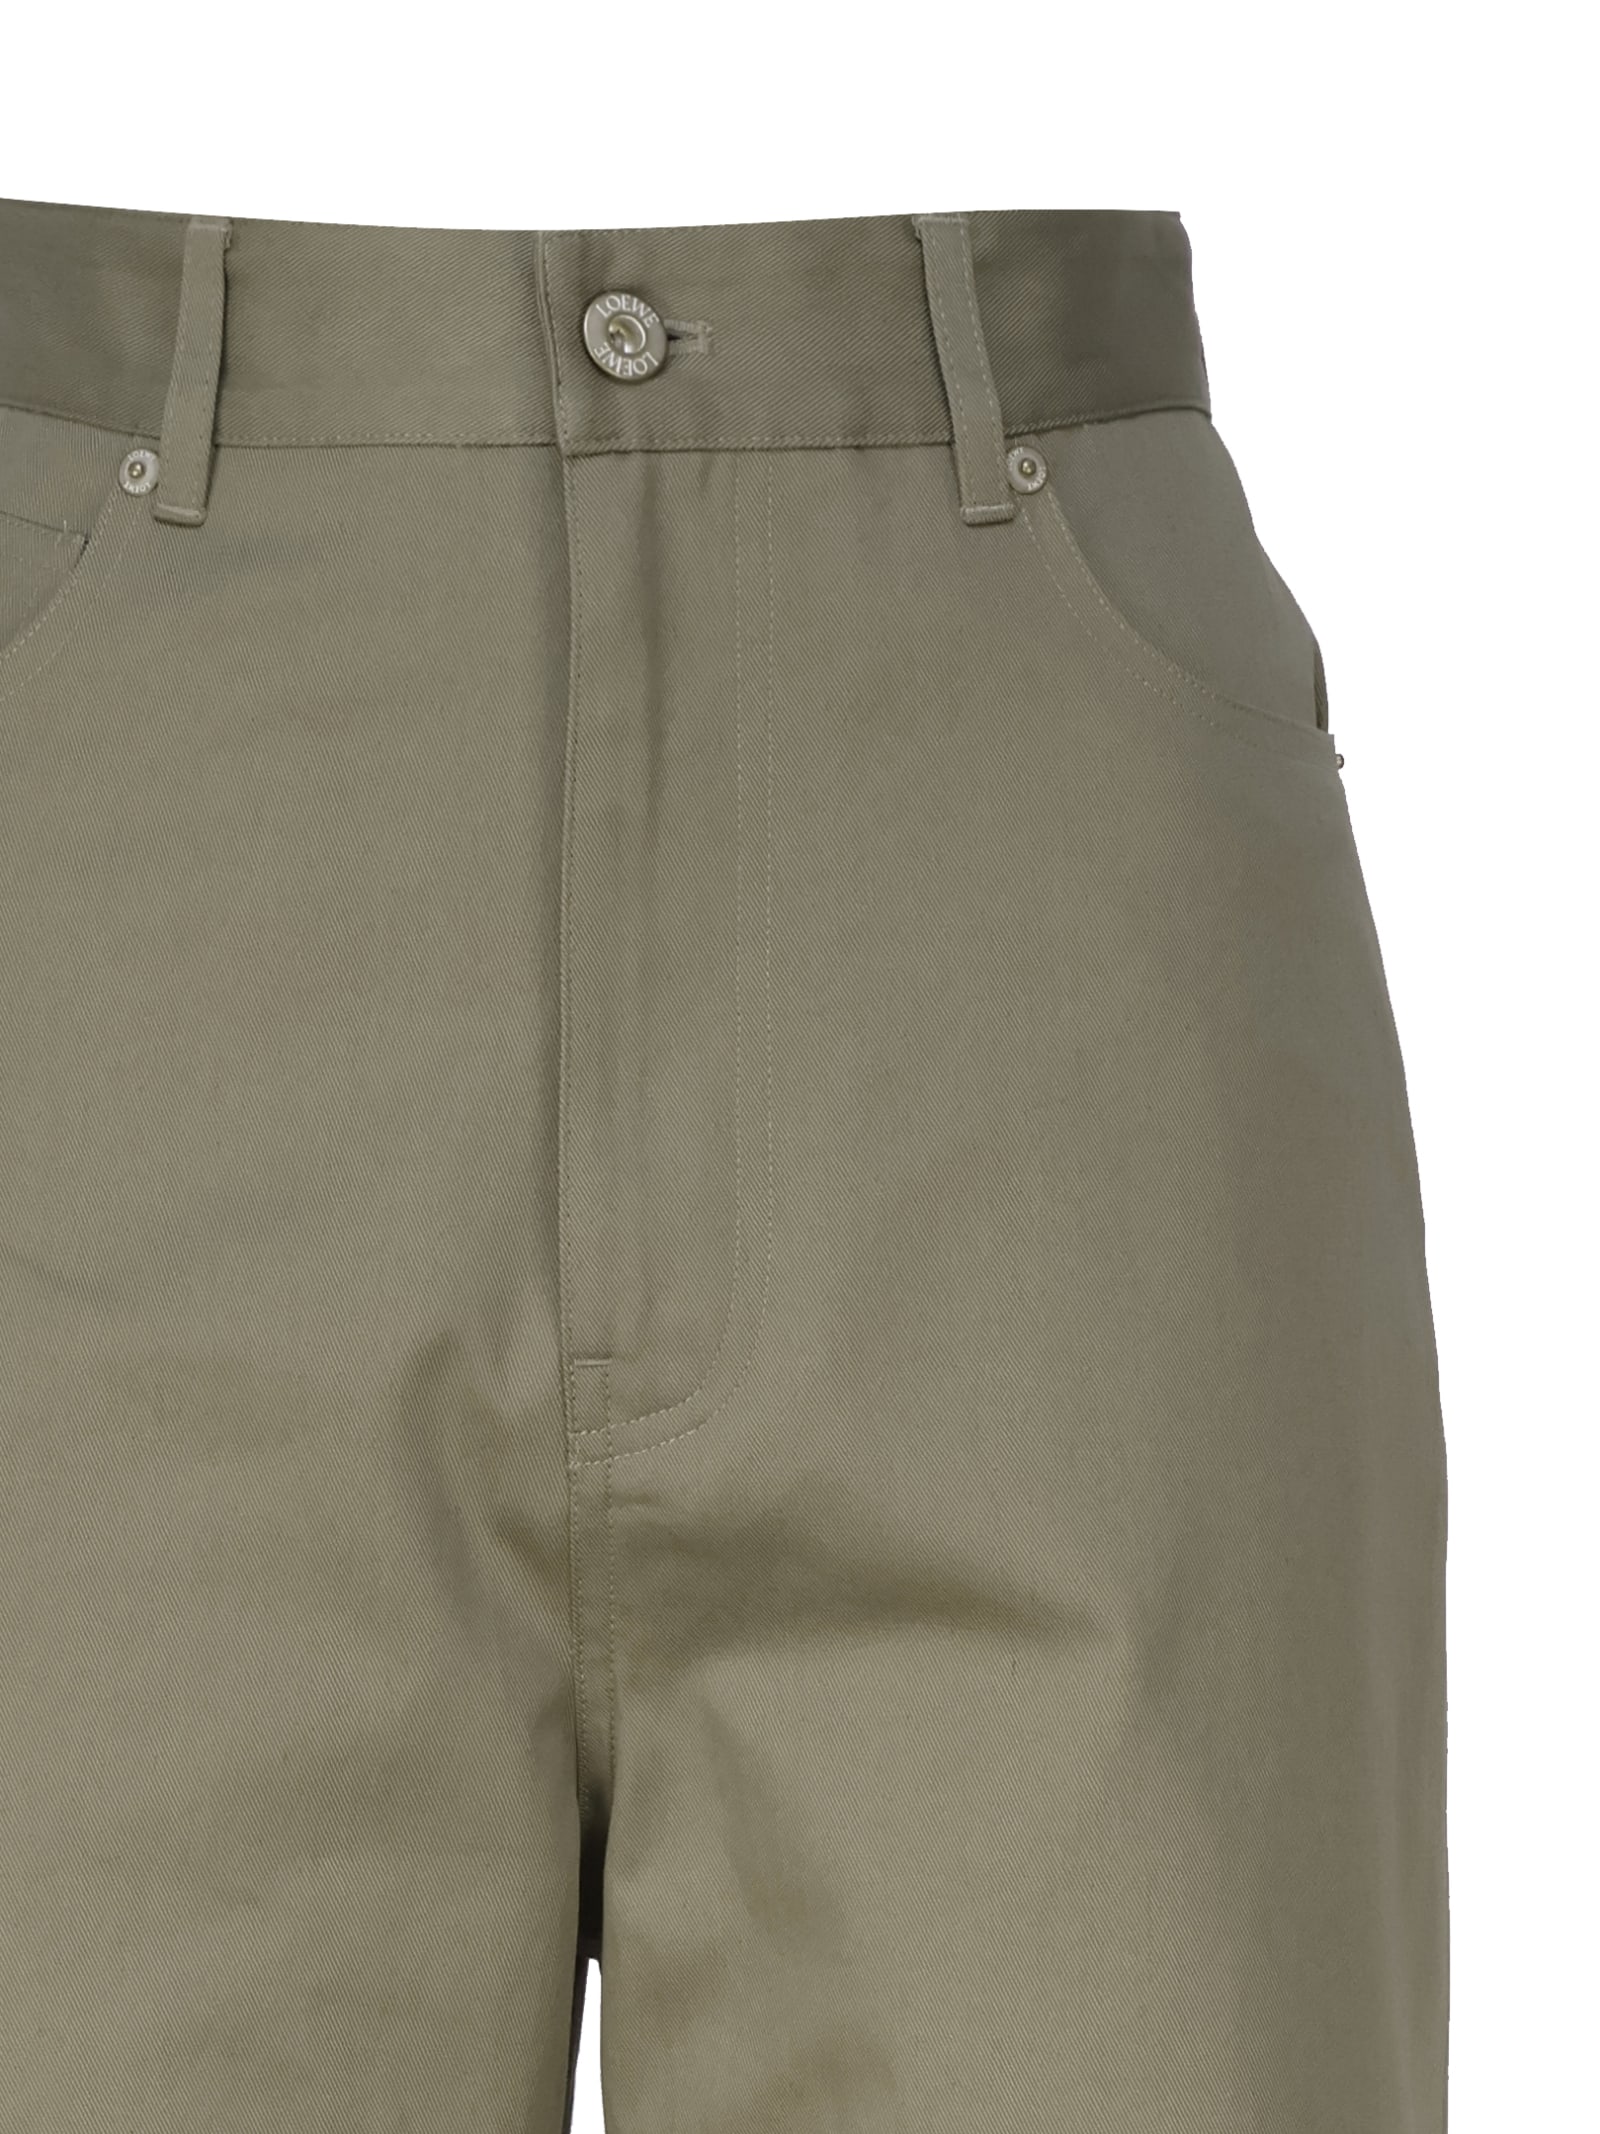 Shop Loewe Trousers Crafted In Lightweight Cotton Drill In Military Green